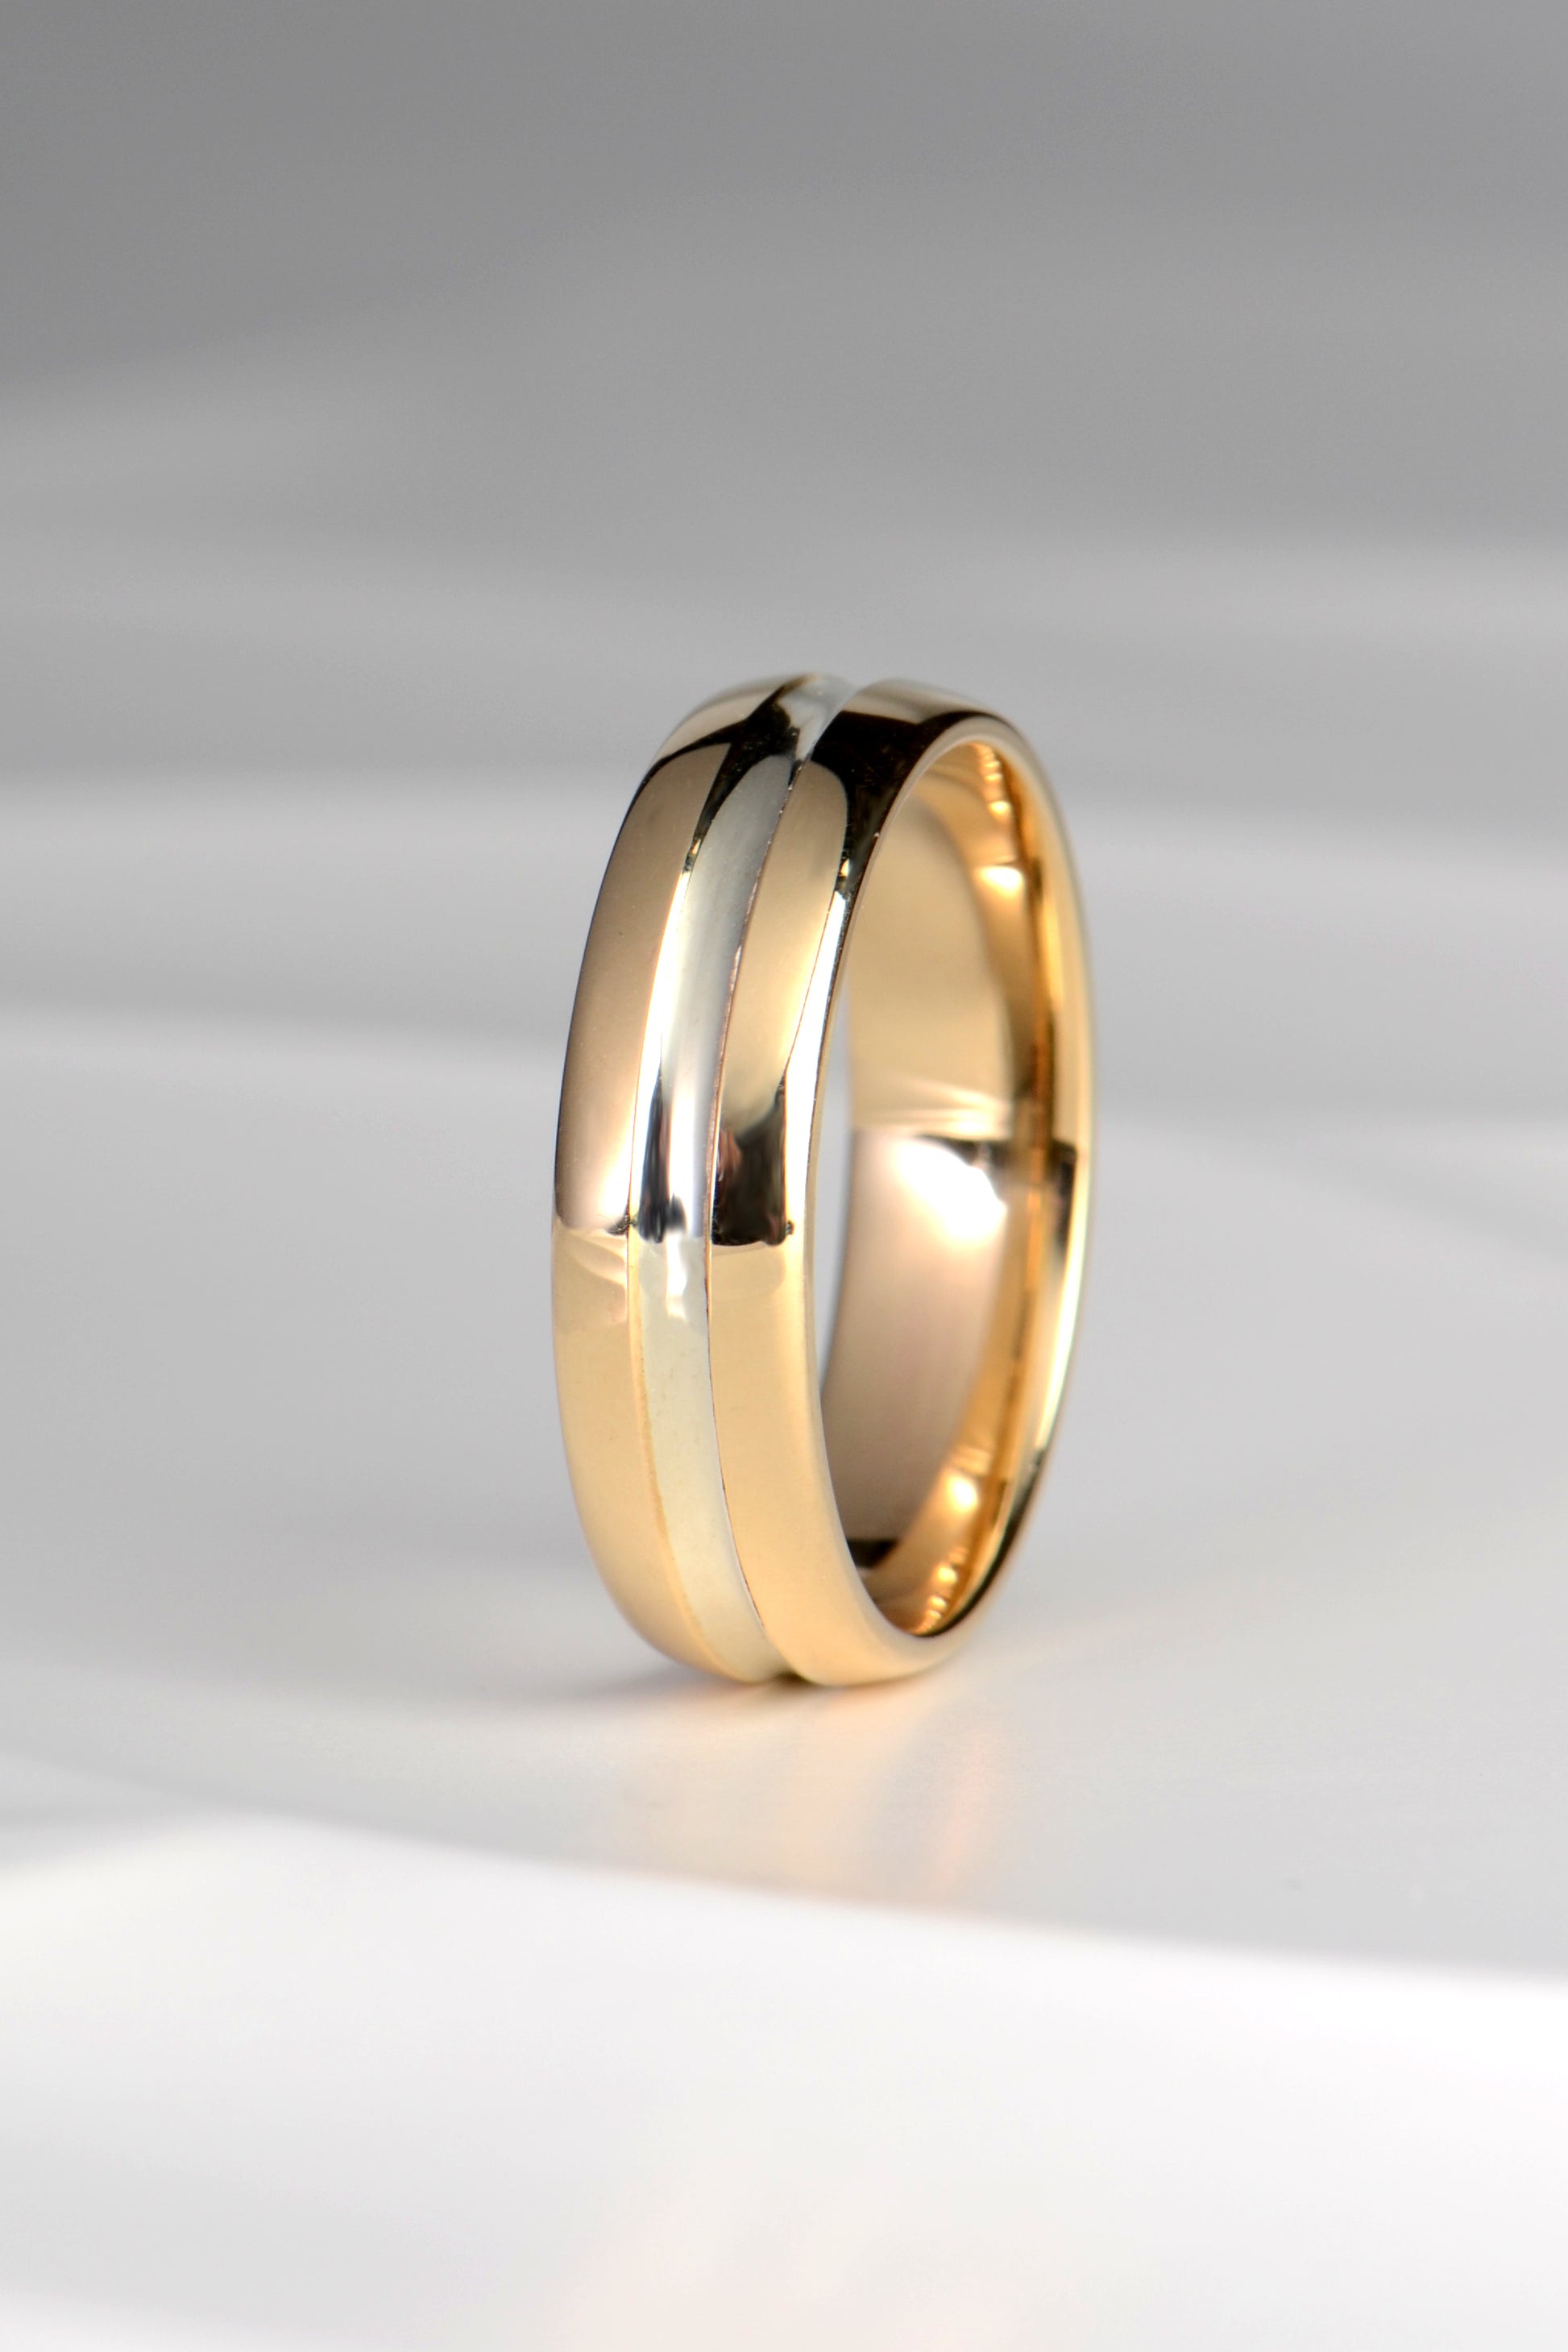 contemporary two tone gent's wedding ring made in the UK